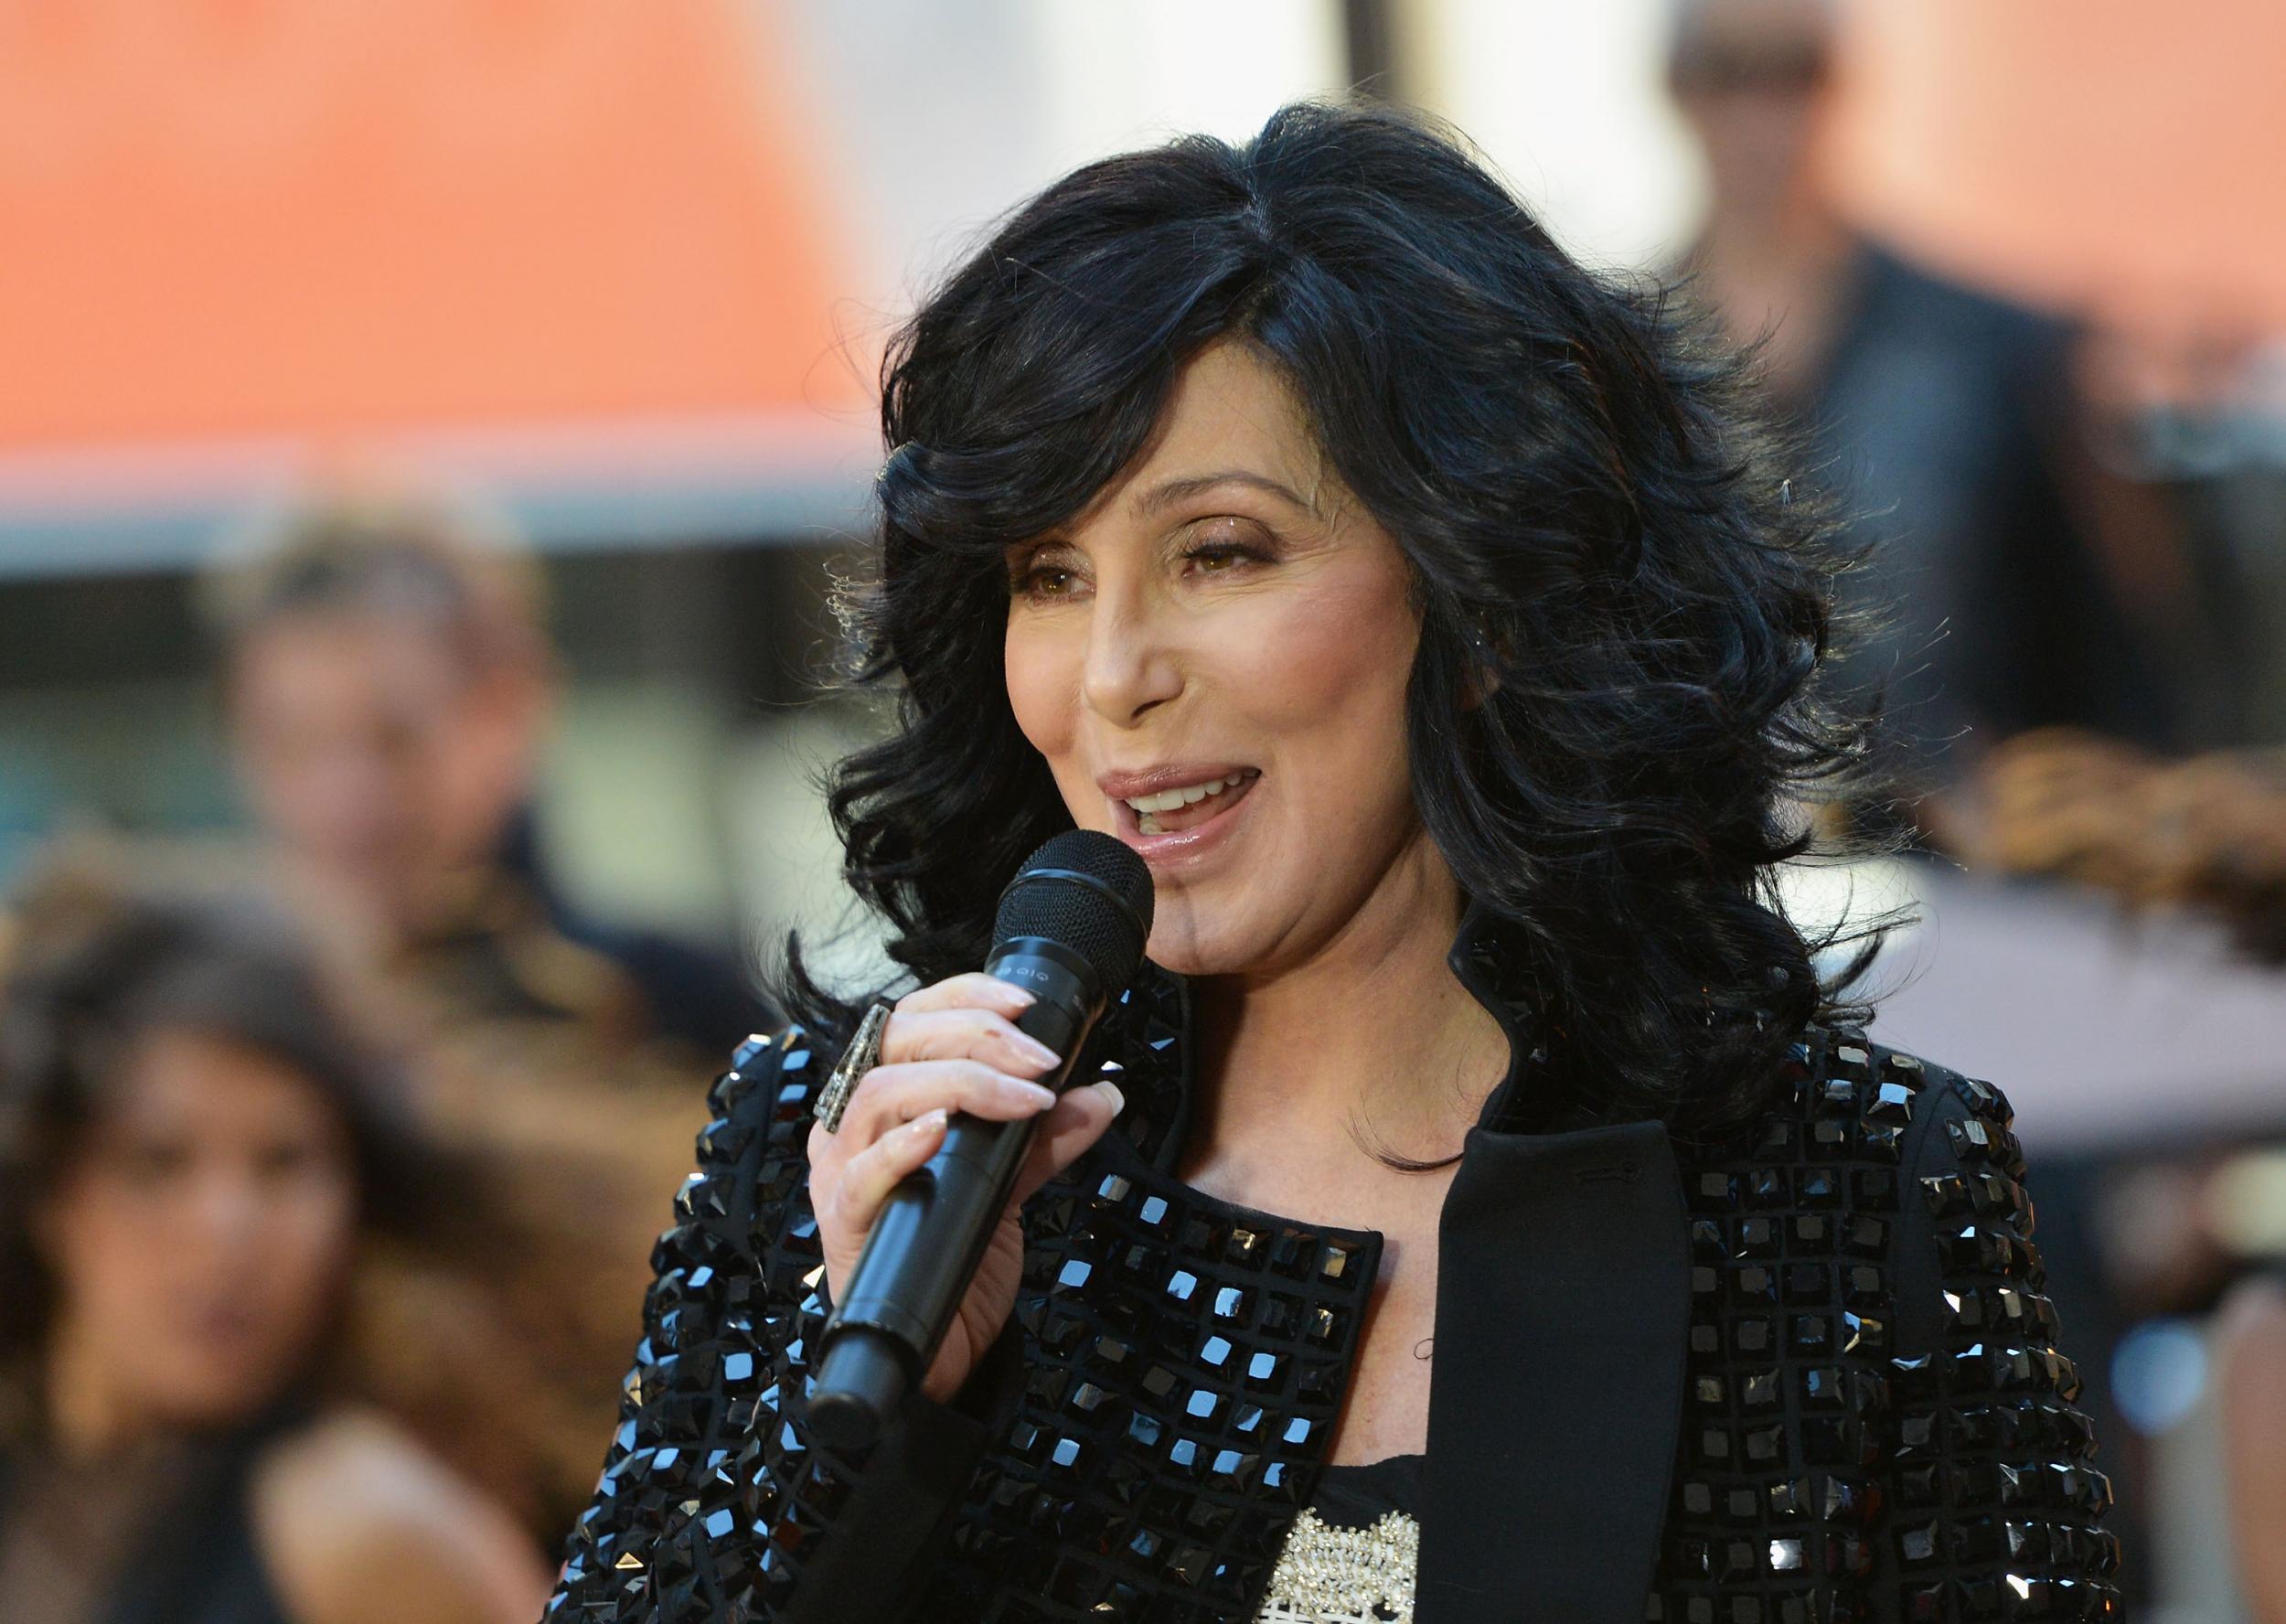 Cher tweeted out against President Donald Trump after his clemency spree this week